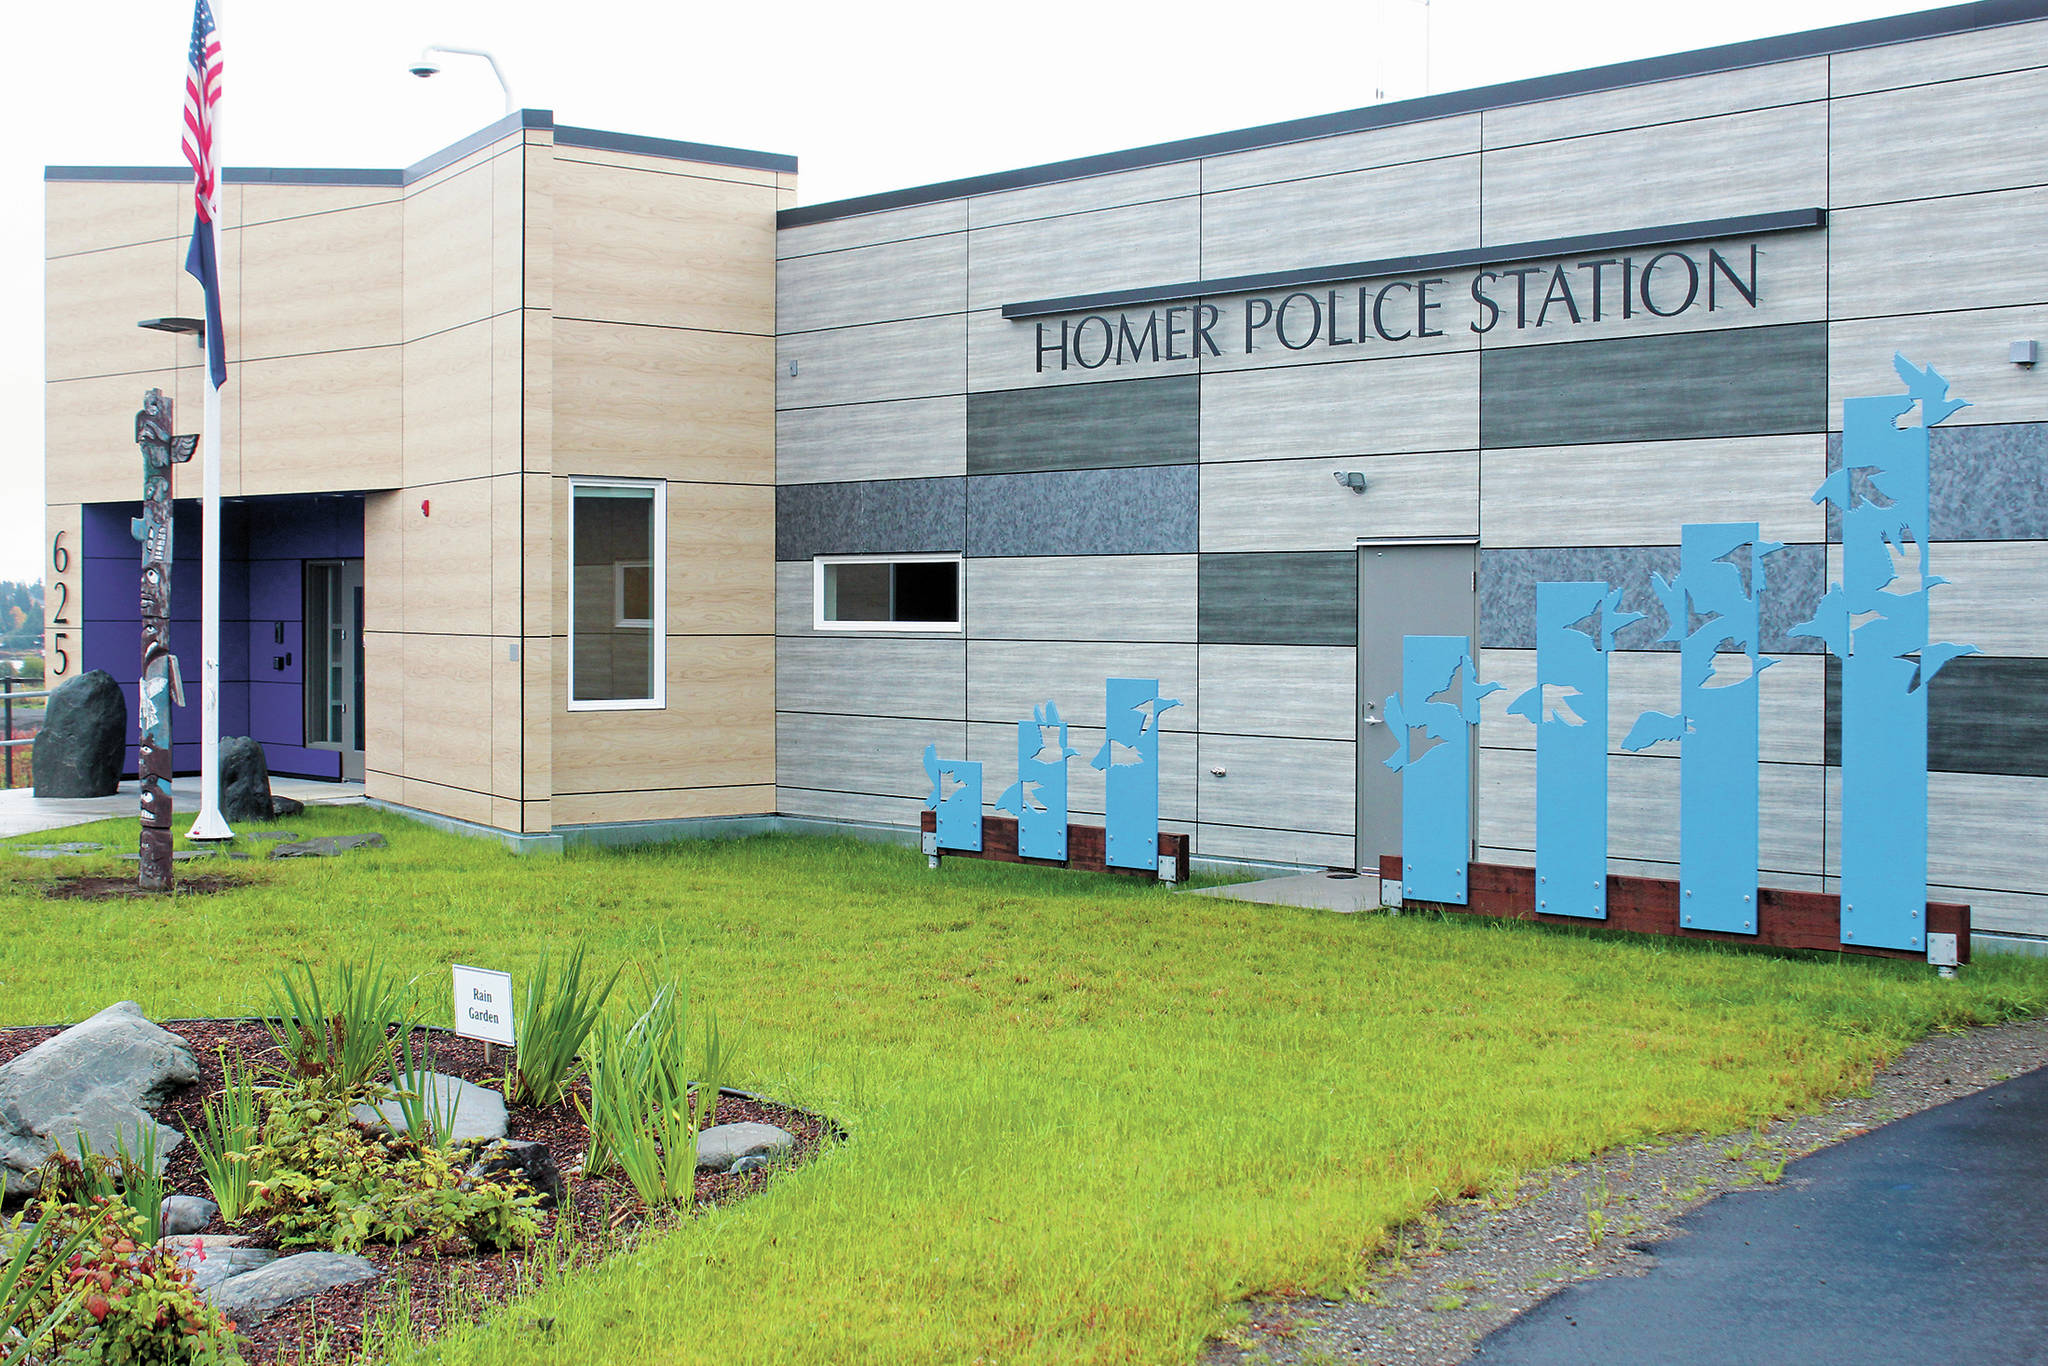 Moving day: Homer Police Department settles into new station